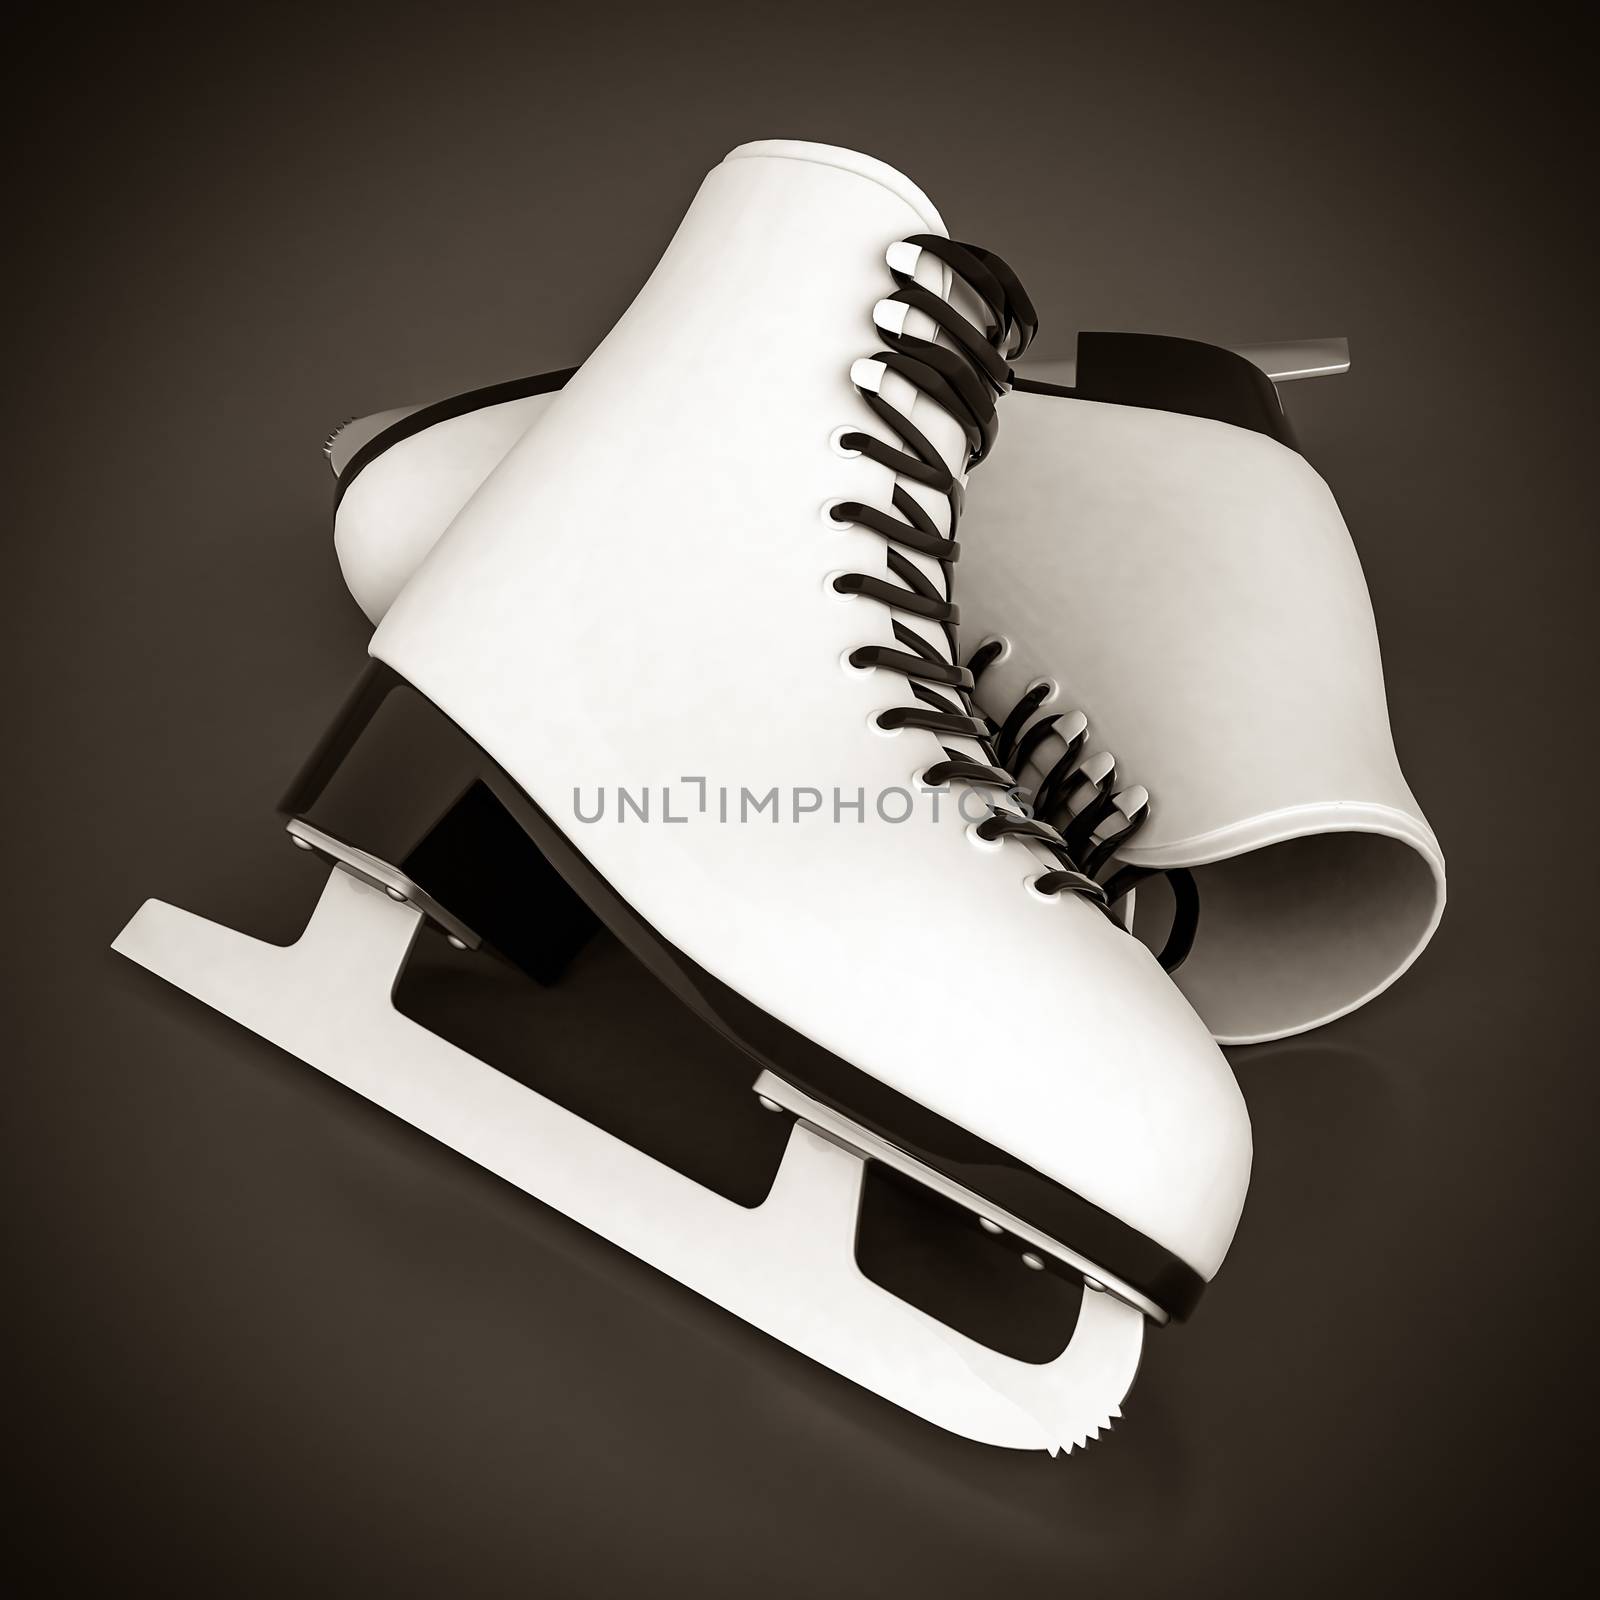 skates for figure skating on a gray background. black and white